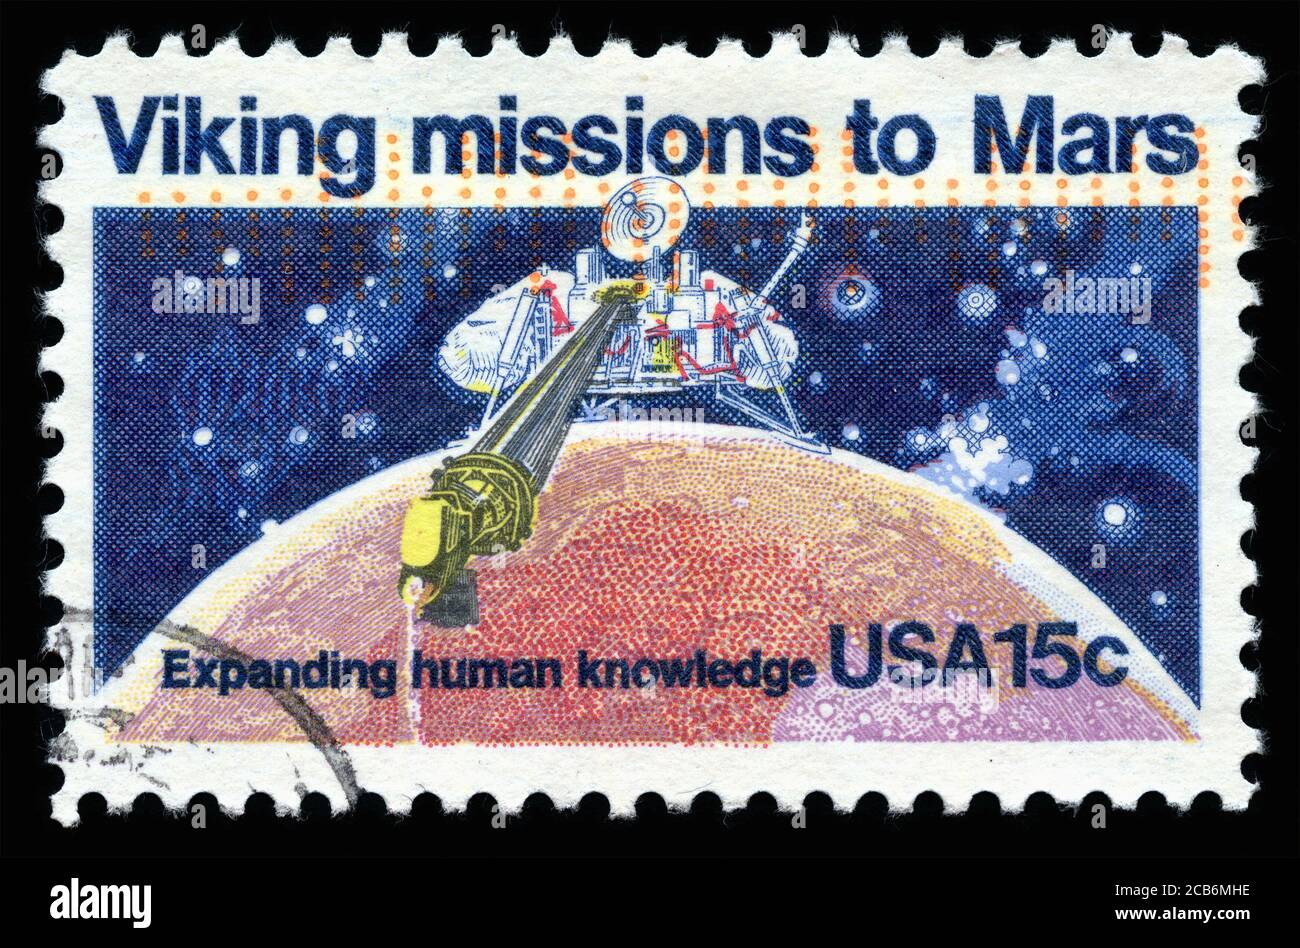 London, UK, February 19 2018 - Vintage 1978 USA cancelled postage stamp showing  Viking missions to Mars stamp collecting stock photo Stock Photo